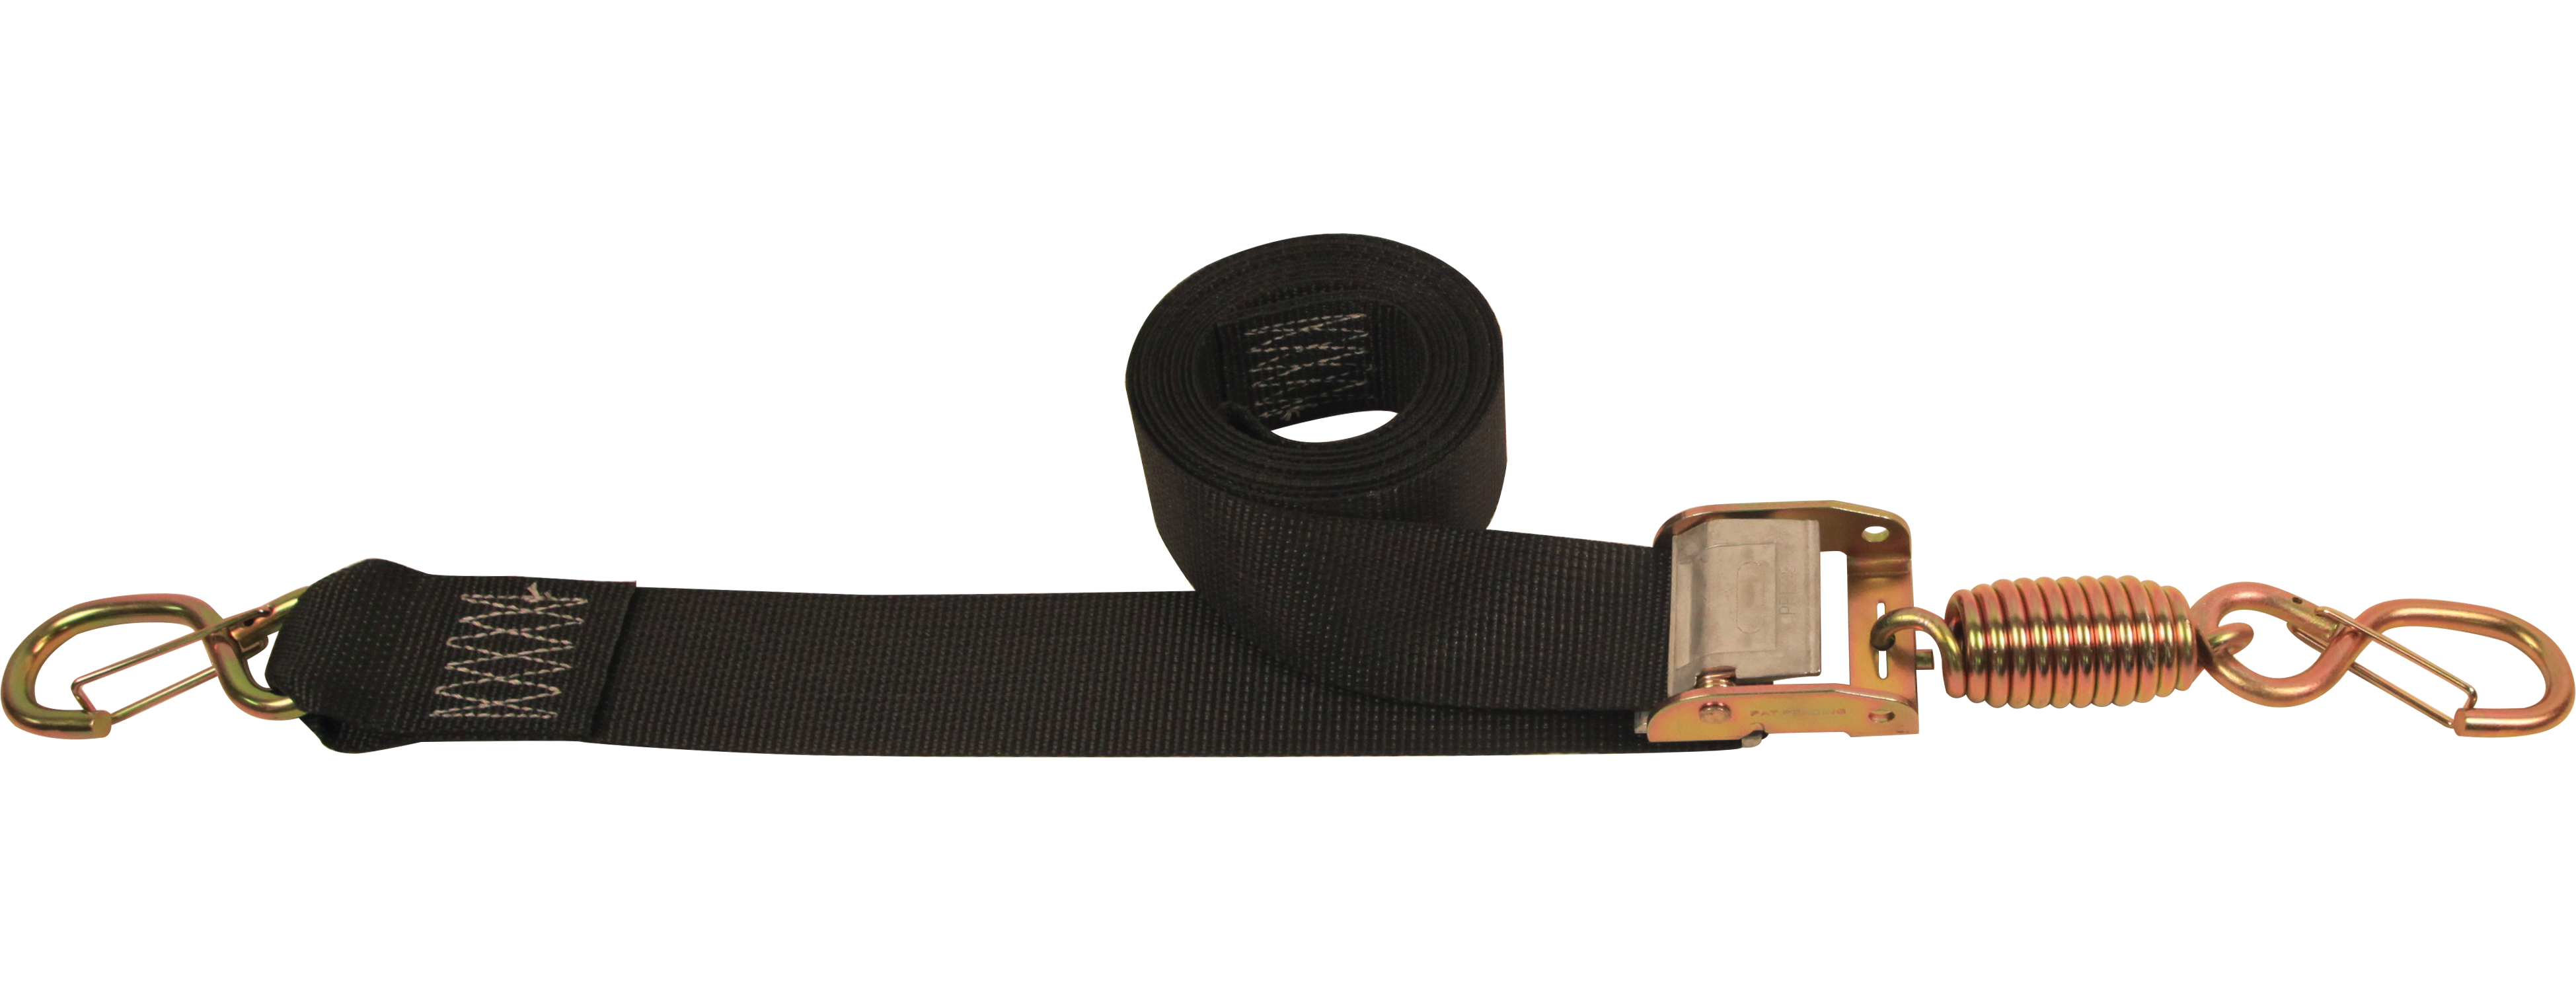 2 x 12' Spring Loaded Cam Buckle Strap with Keeper S Hooks